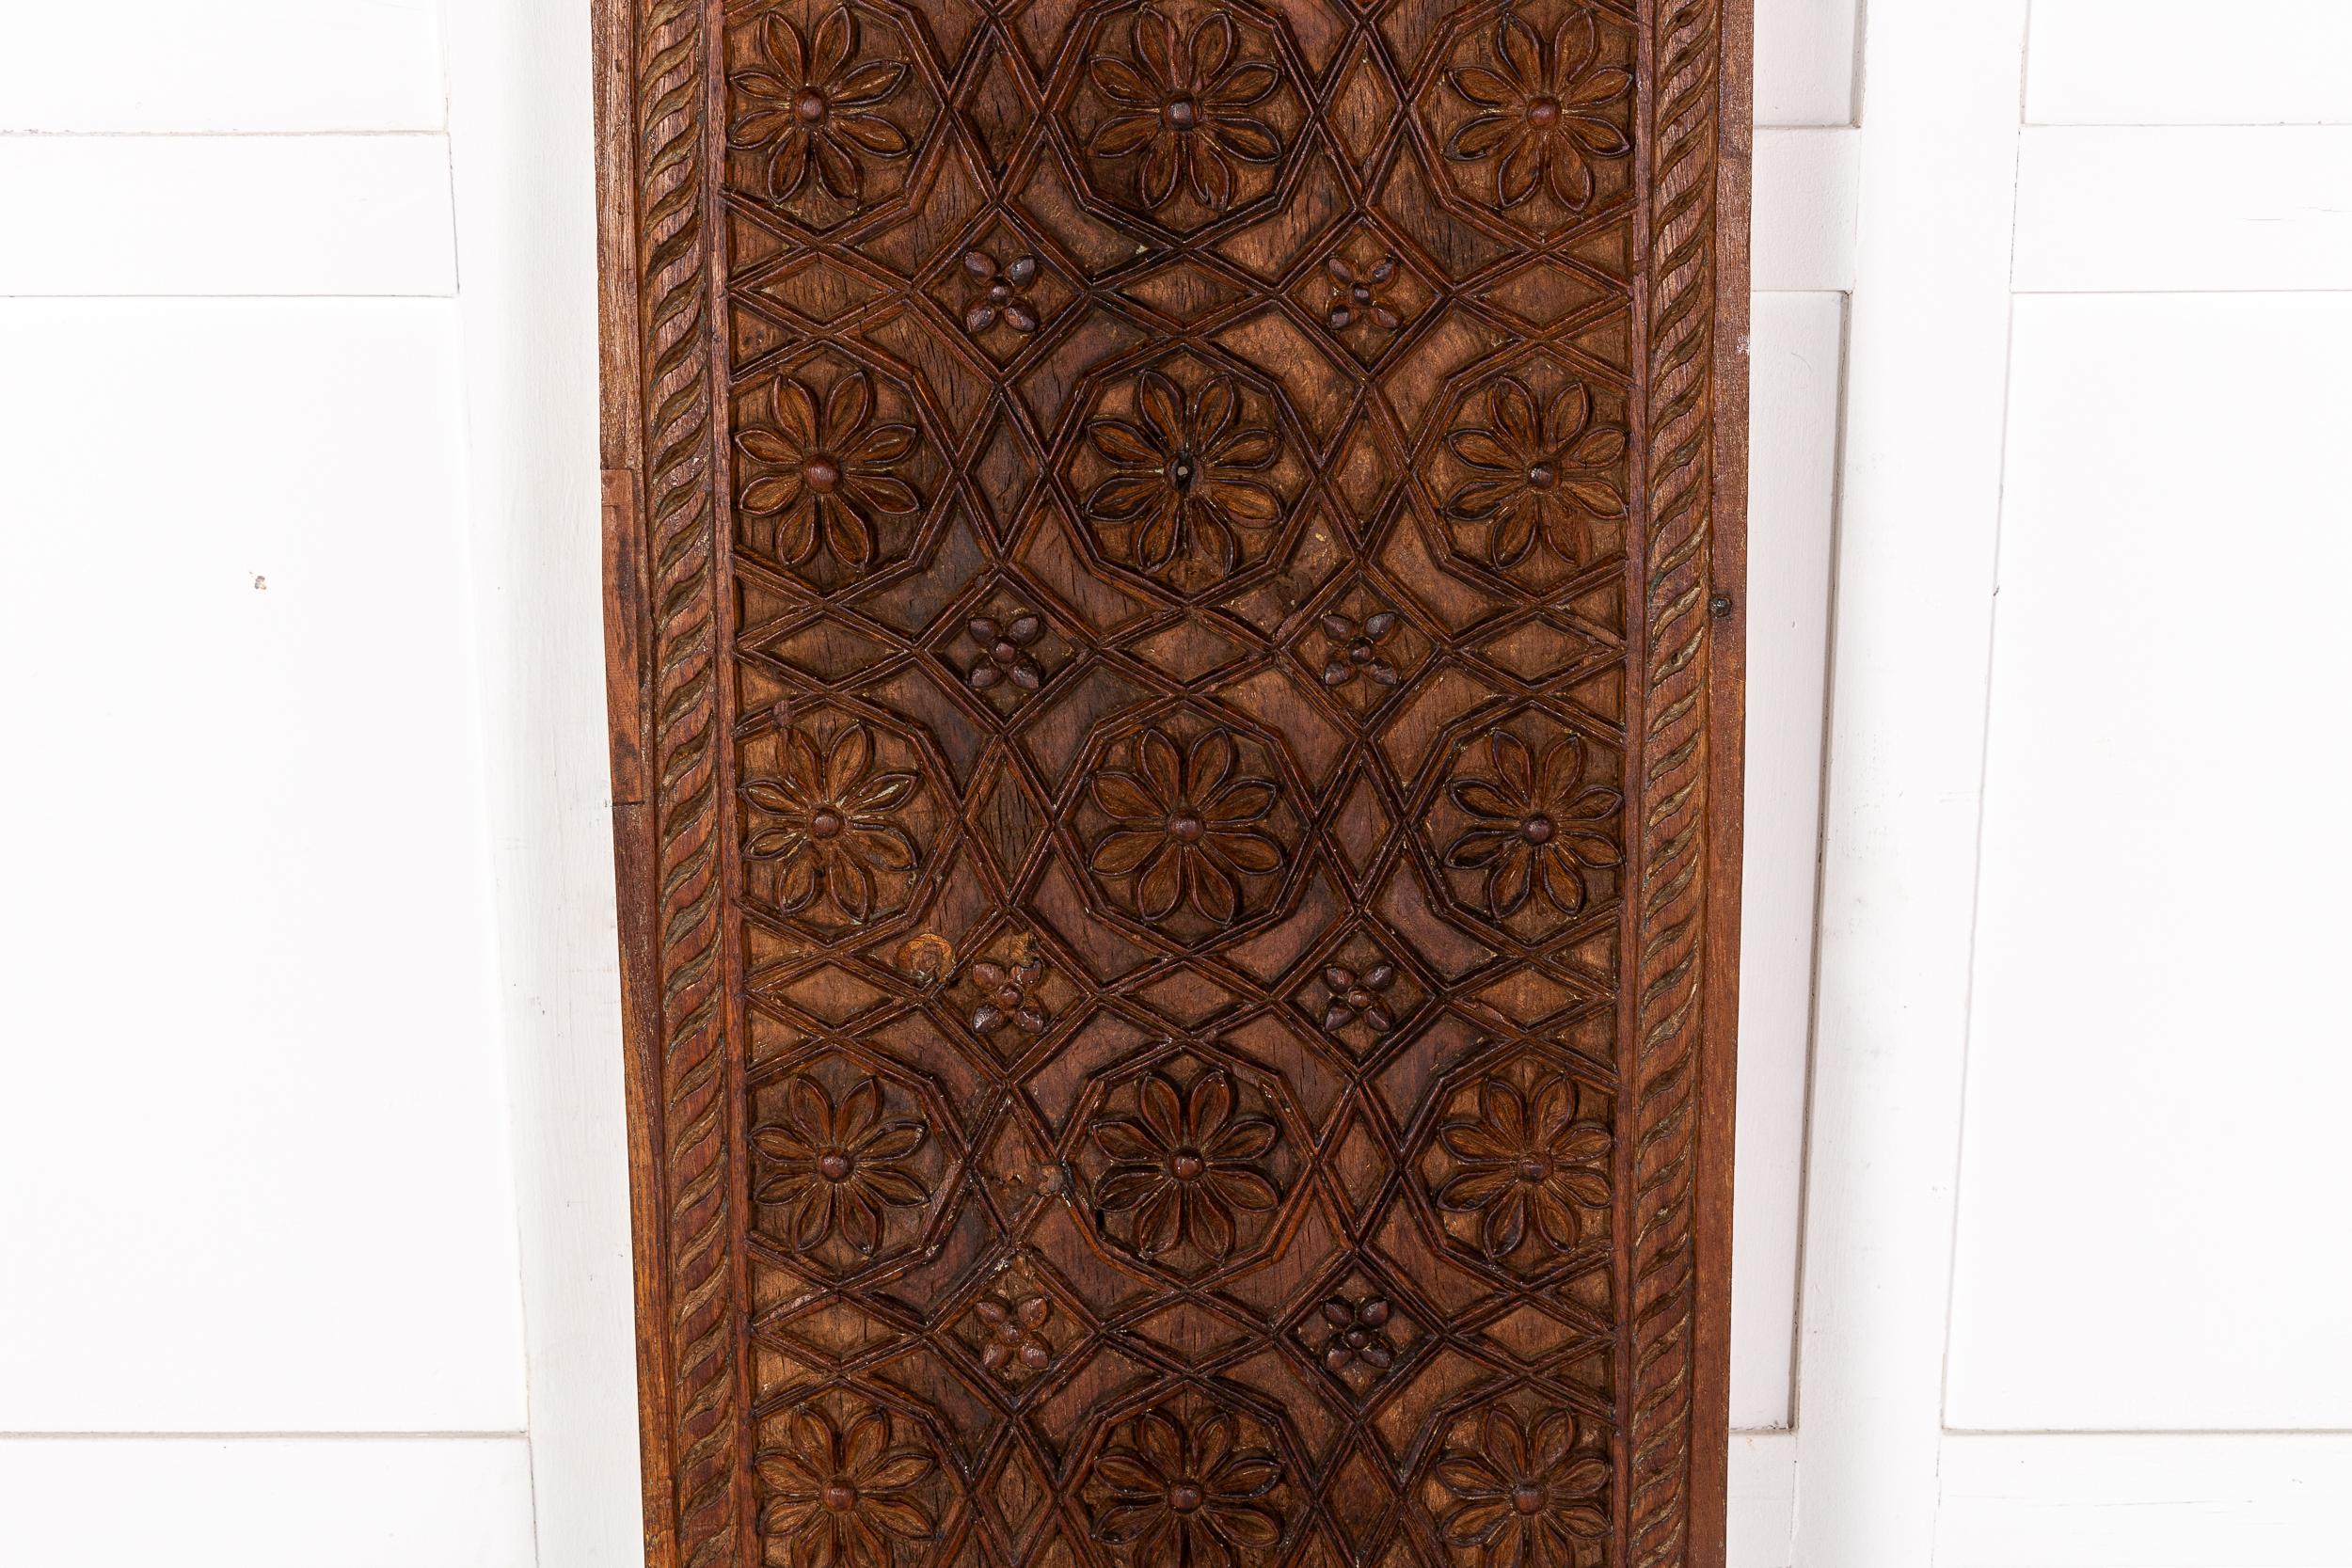 Large 19th Century Syrian Carved Hardwood Panel In Excellent Condition For Sale In Gloucestershire, GB